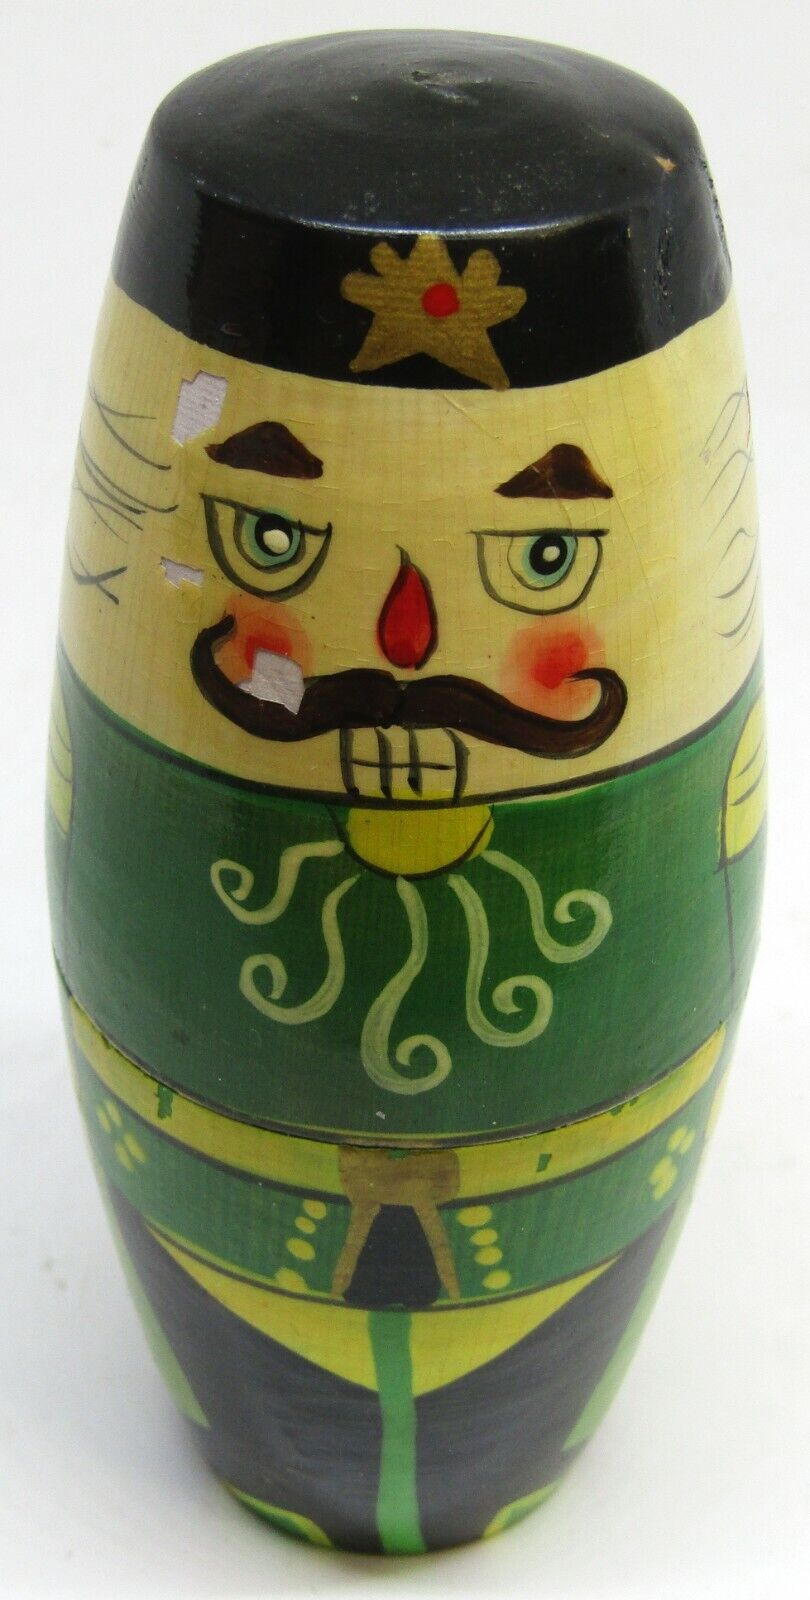 Vintage Russian Nesting Doll.